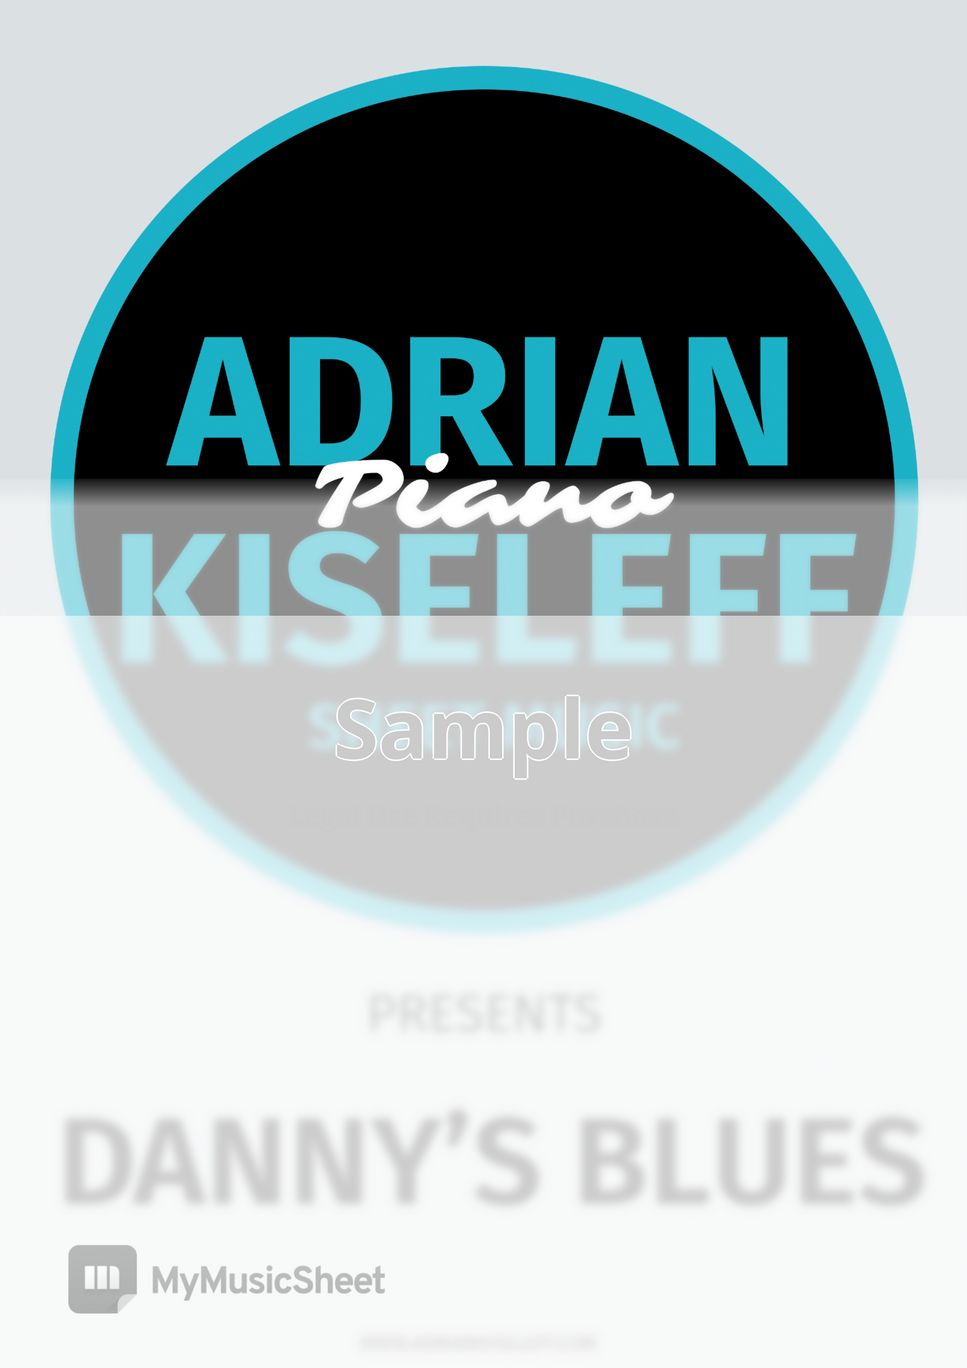 Ennio Morricone - Danny's Blues (The Legend of 1900 Soundtrack) (For Piano Solo) by Adrian Kiseleff